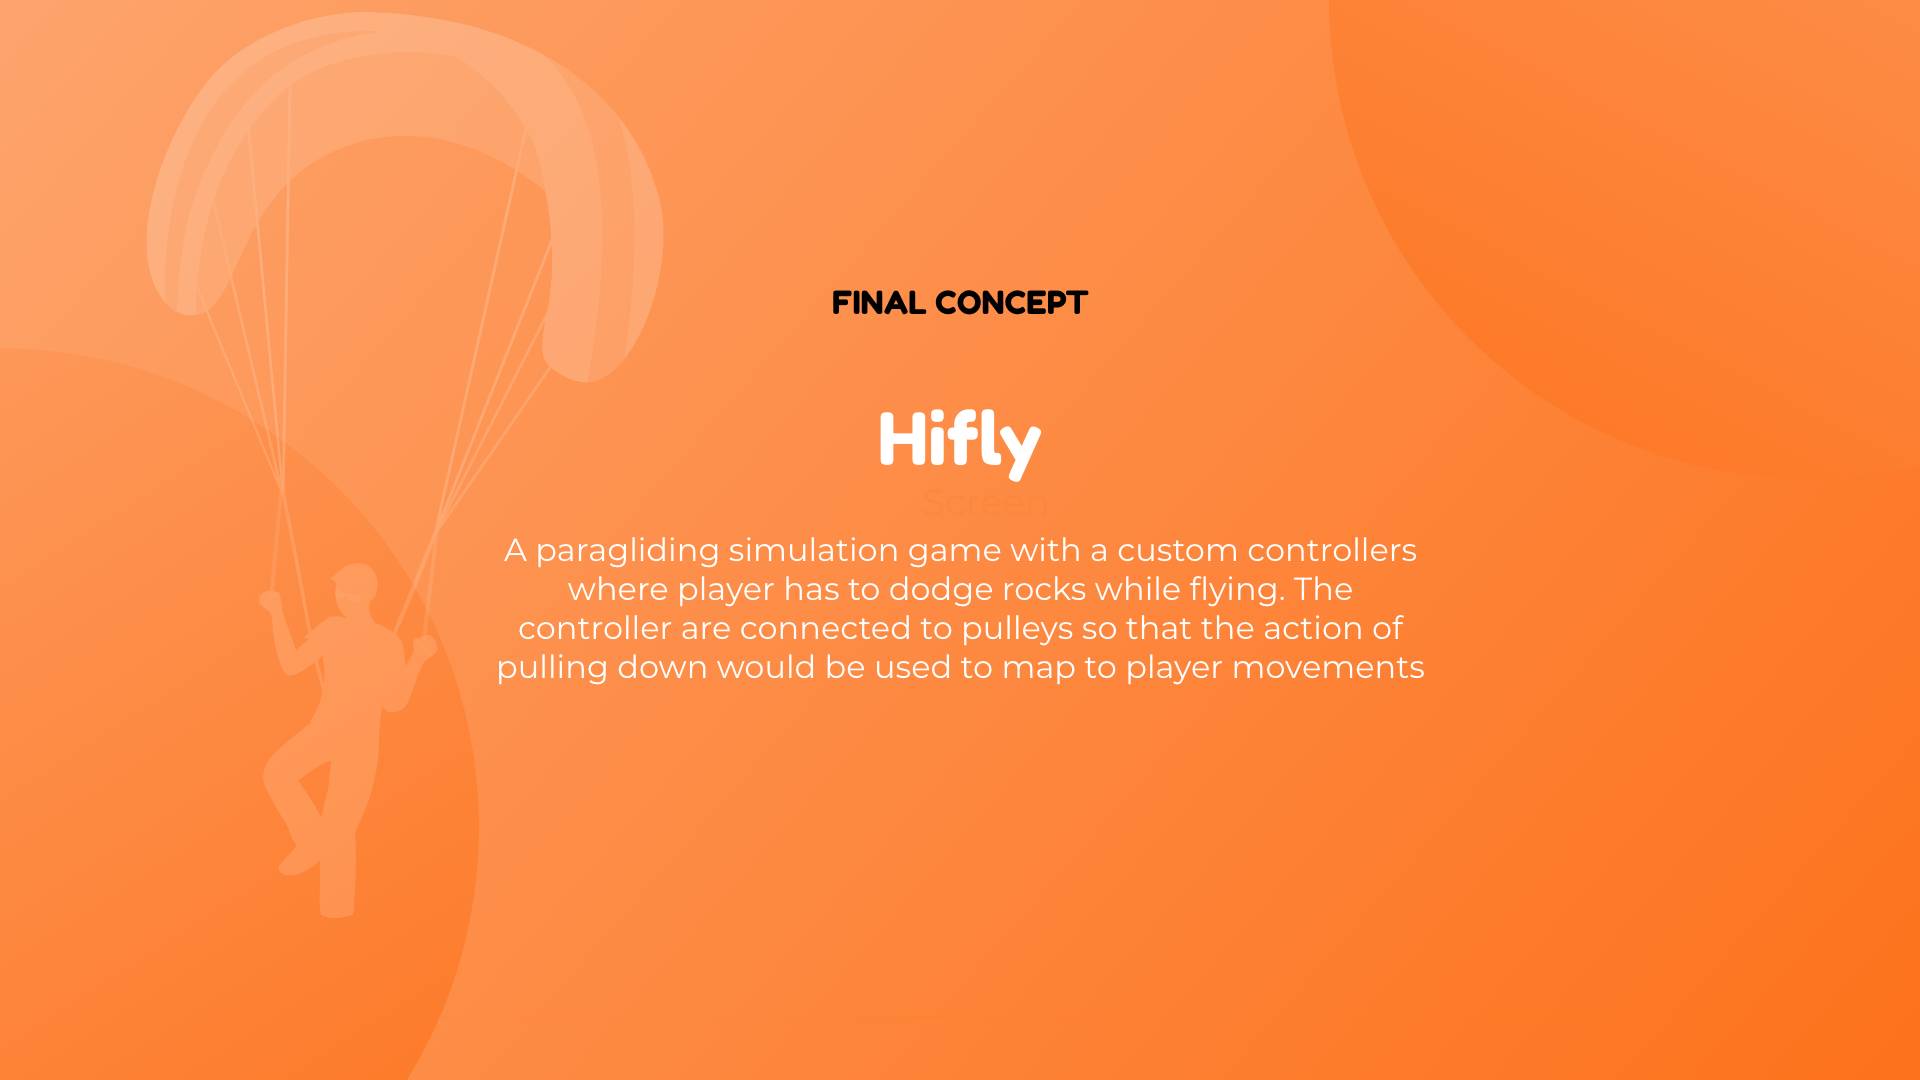 HiFly - A paragliding game - Allwin Williams